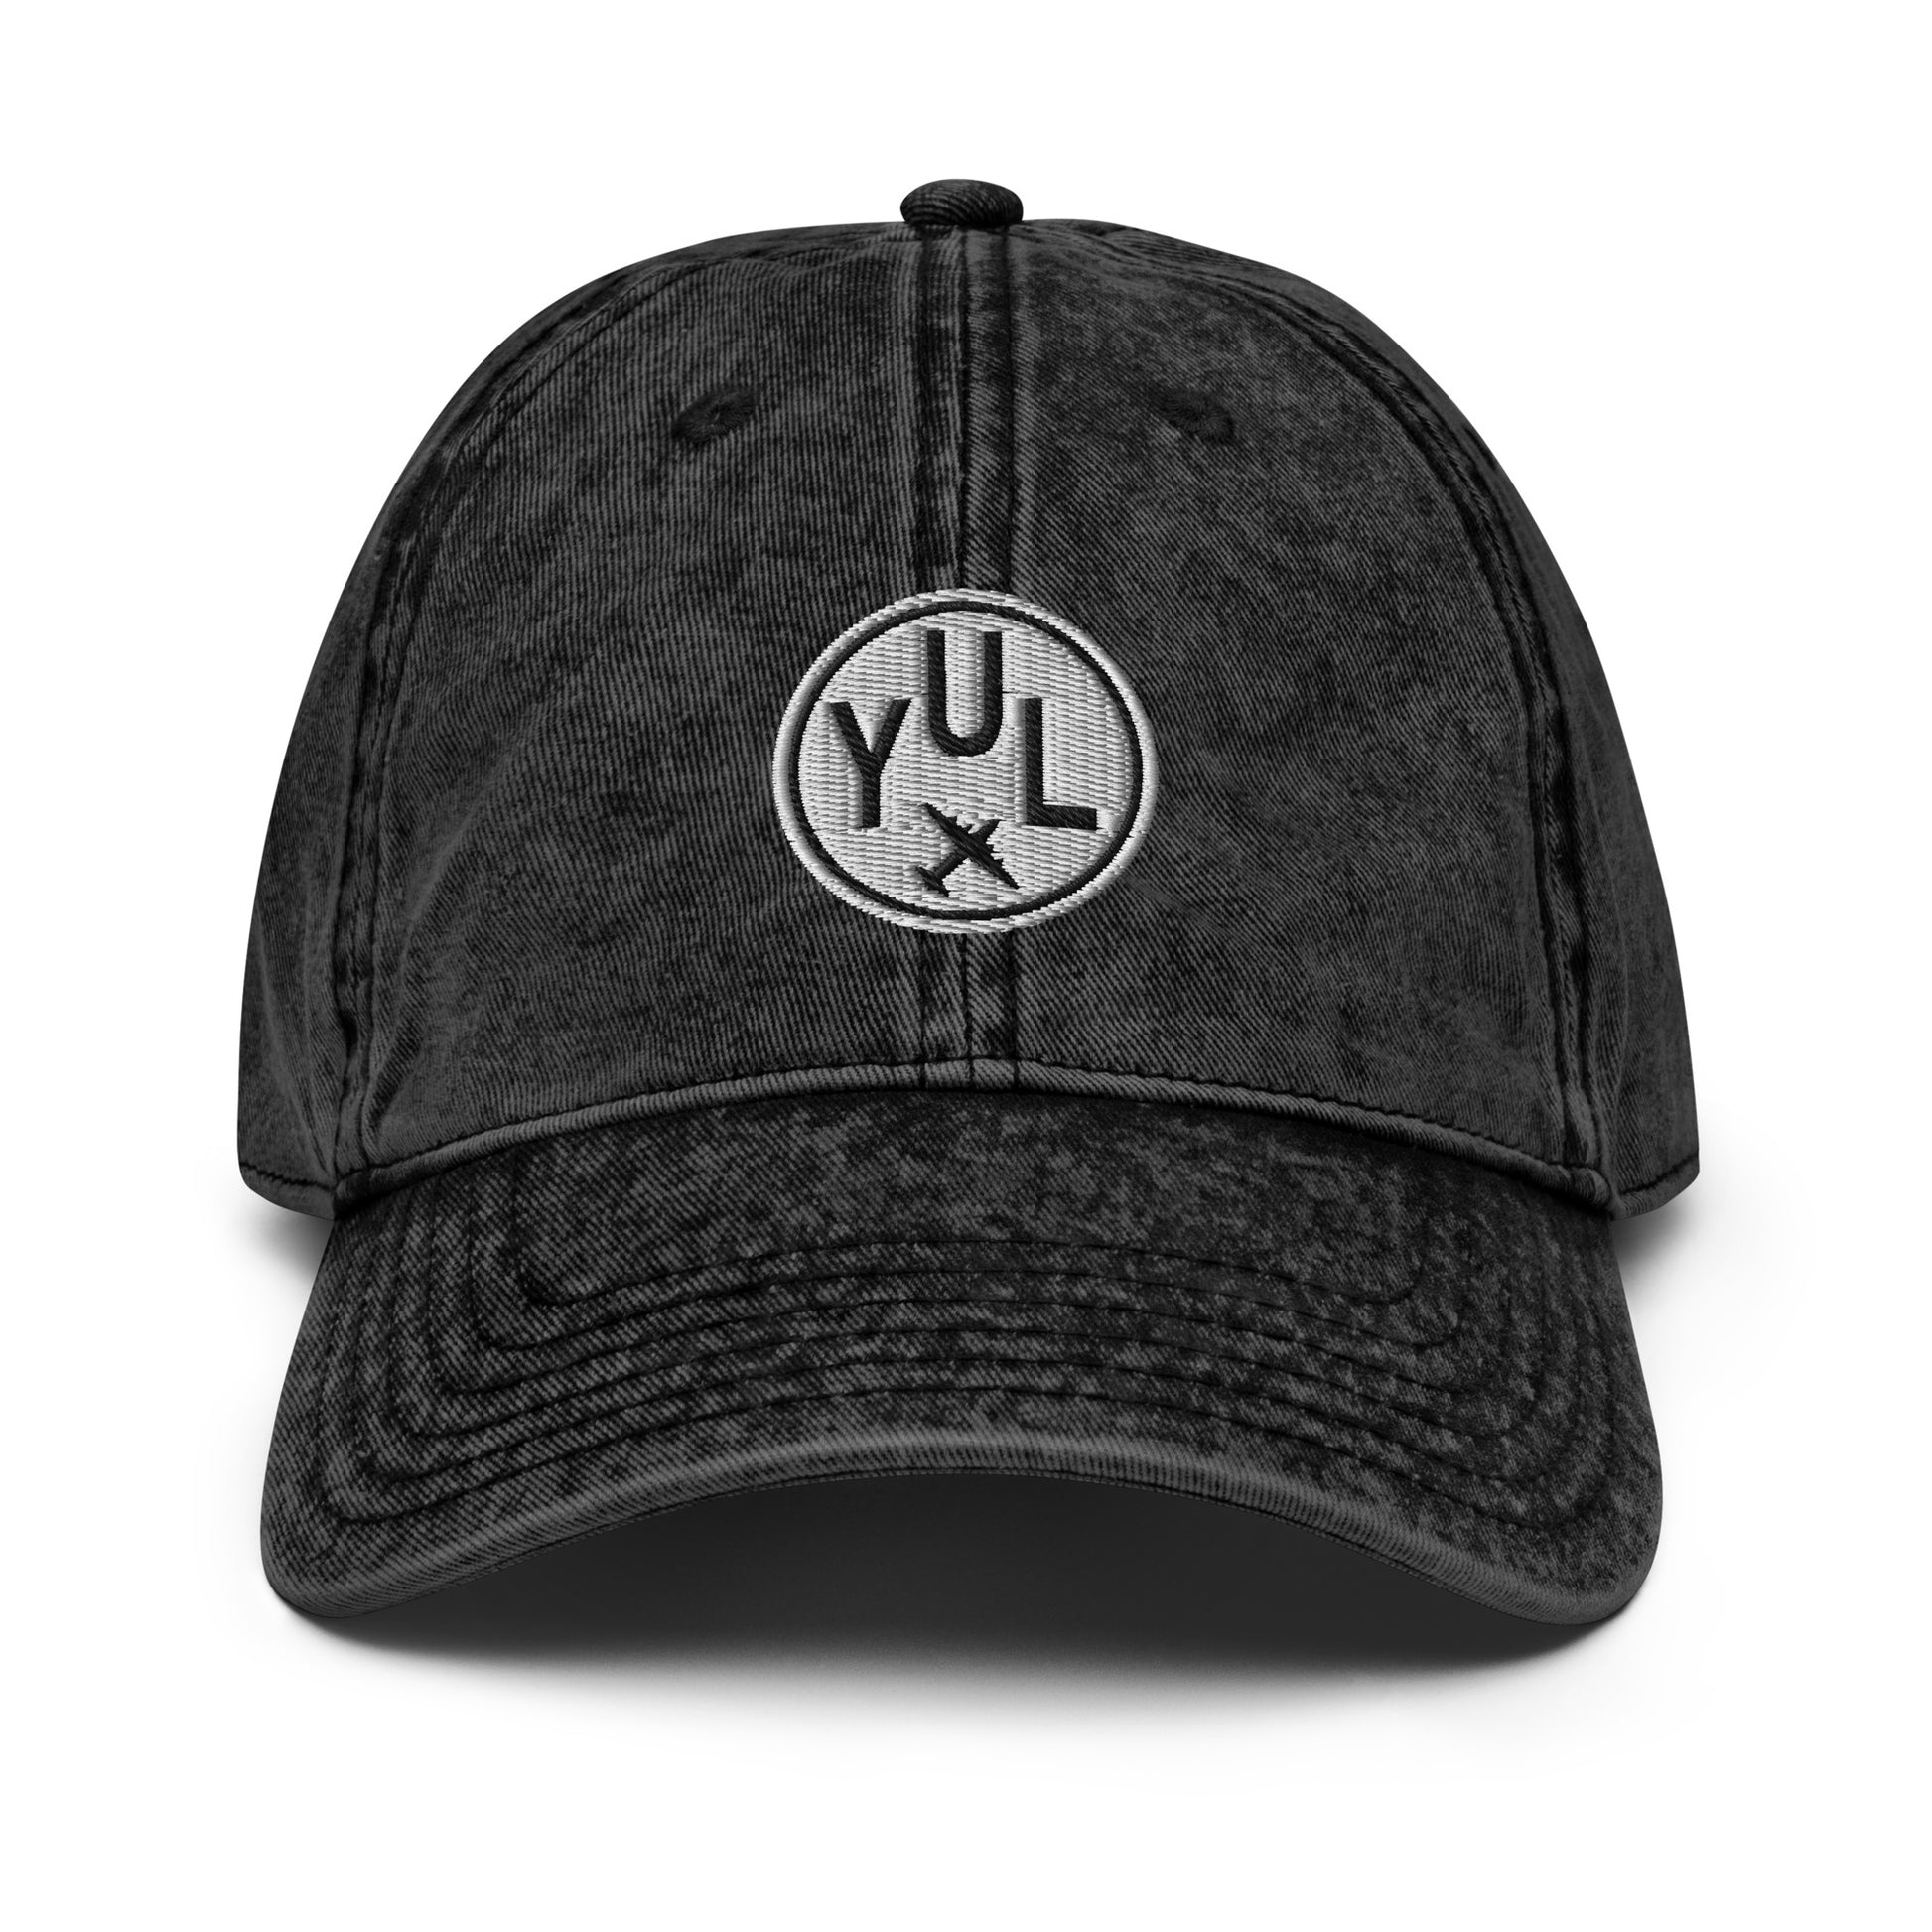 Roundel Twill Cap - White • YUL Montreal • YHM Designs - Image 05